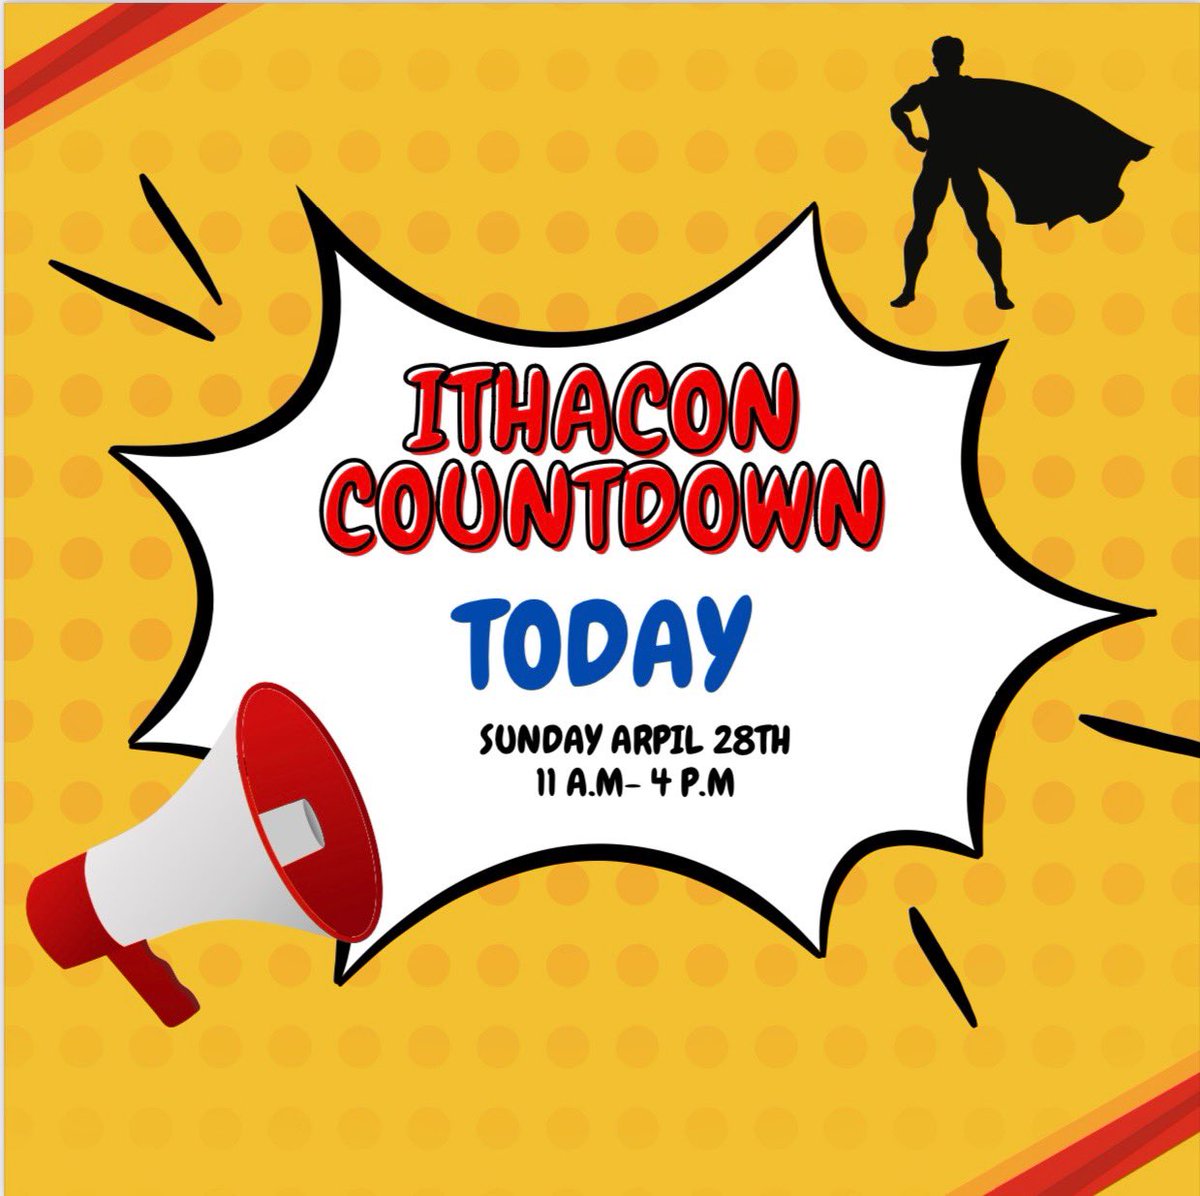 The final day of ITHACON 47 is here! Doors open at 11. Get your tickets now if you haven’t already!